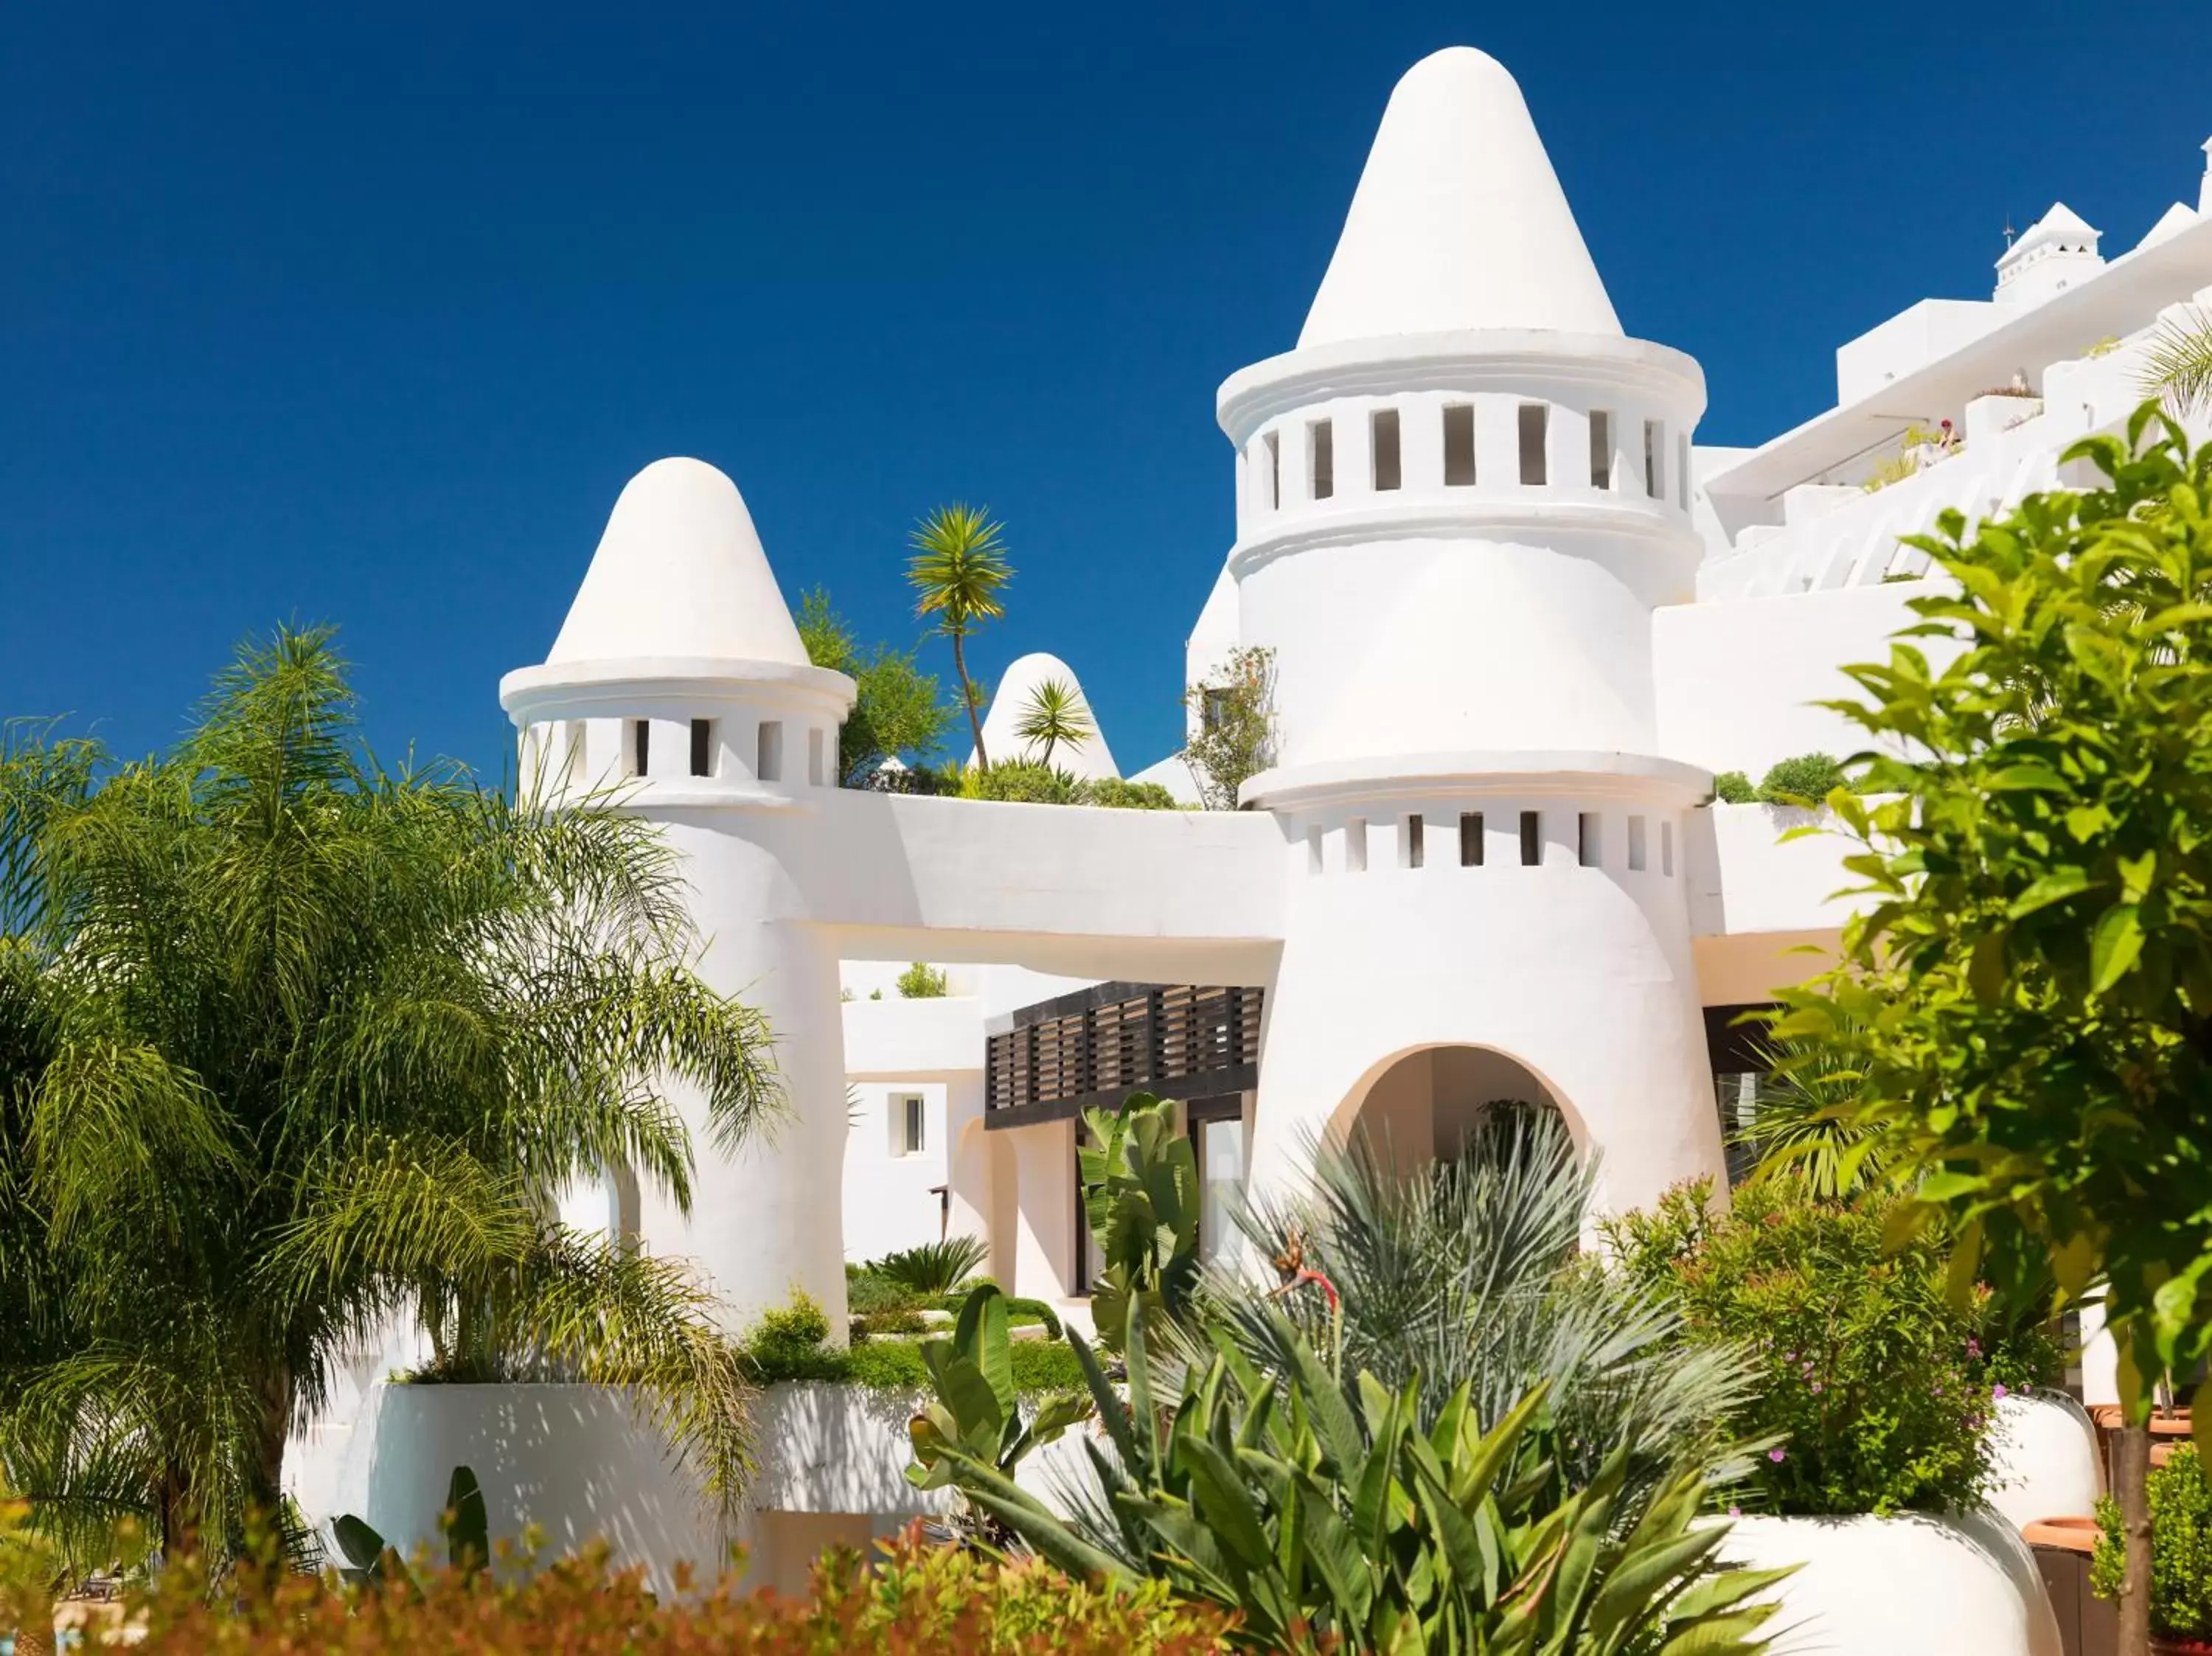 Off site, Property Building in H10 Estepona Palace